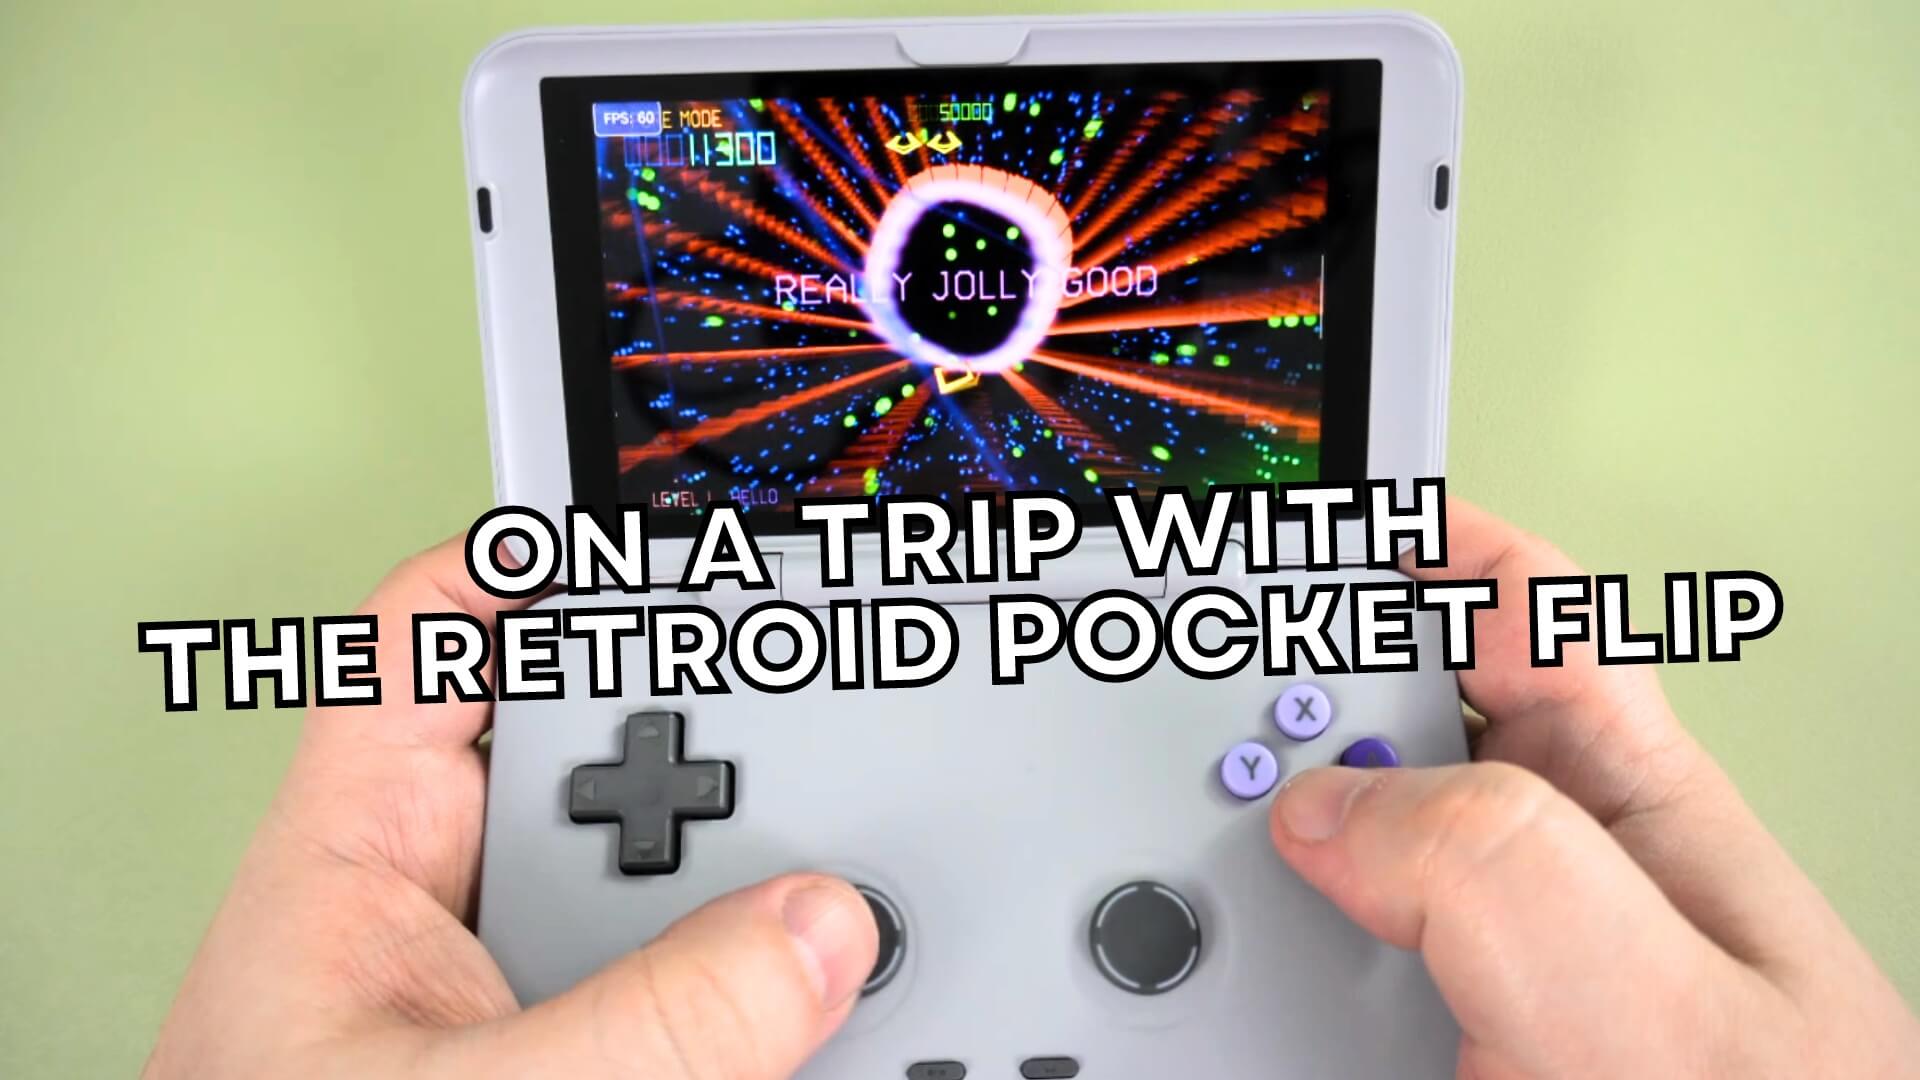 Retroid Pocket Flip Review – Awesome Android 11 clamshell retro gaming handheld!